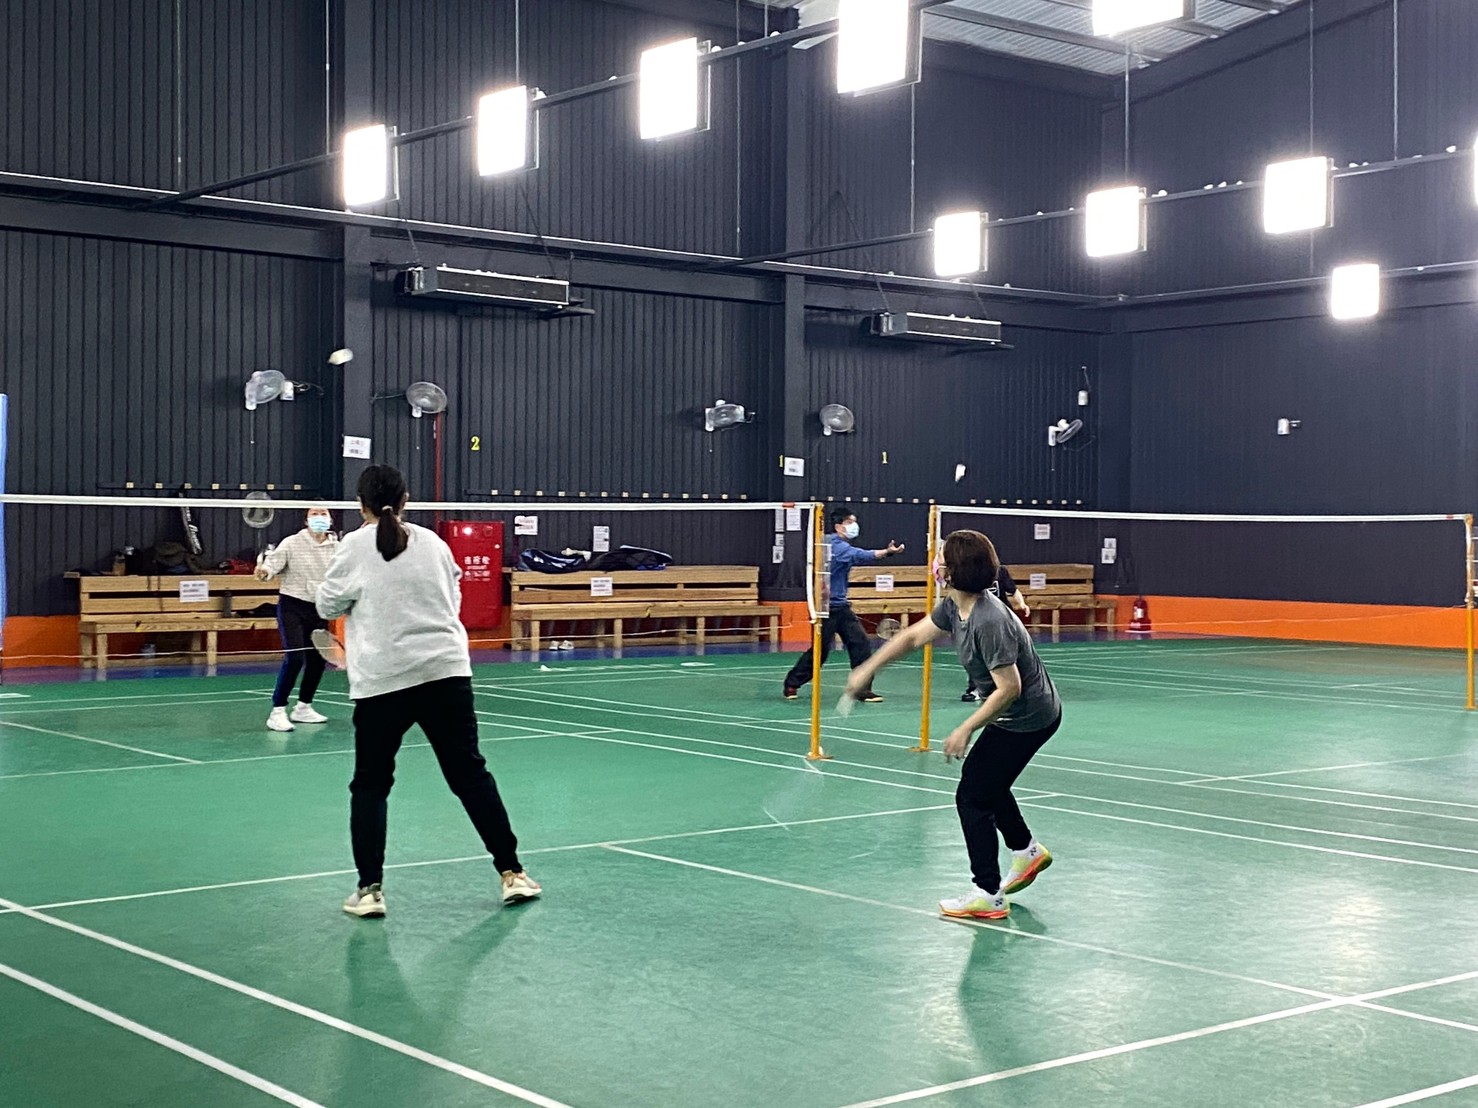 【TOP UNION Club News】The third session of the Badminton Club is now open for registration!